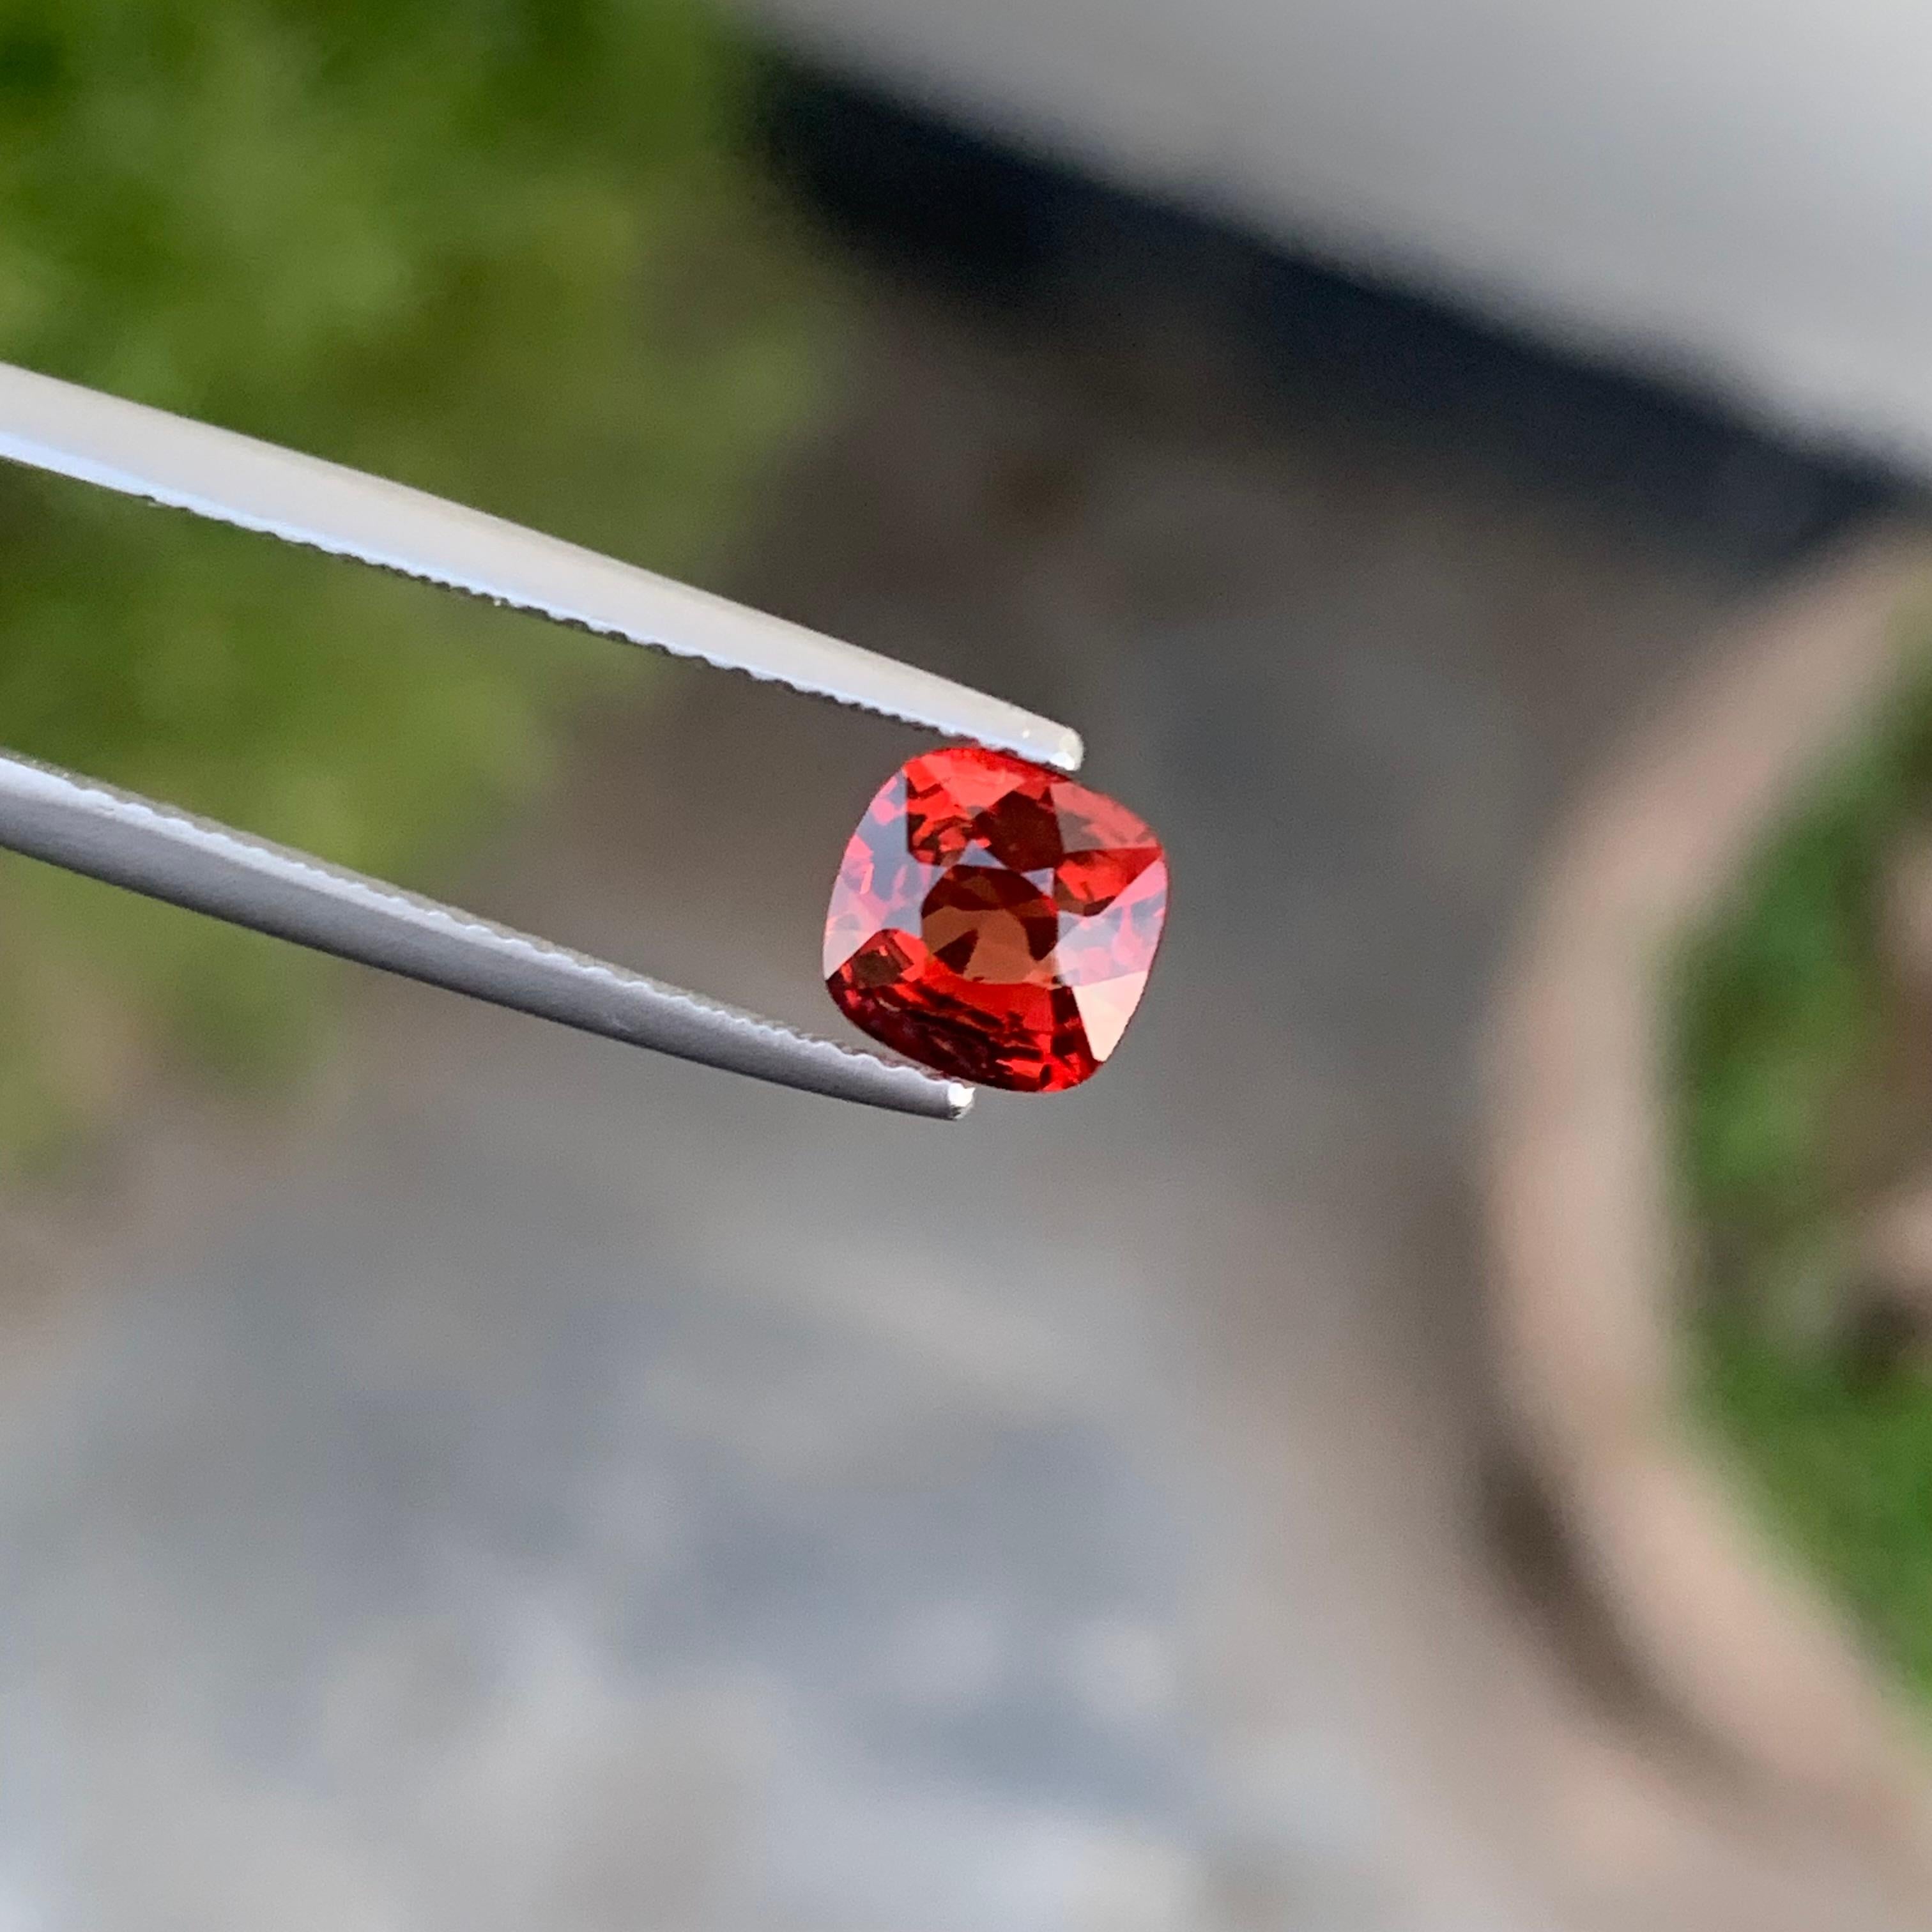 Charming 1.25 Carat Cushion Cut Loose Natural Red Spinel from Burma Myanmar 3